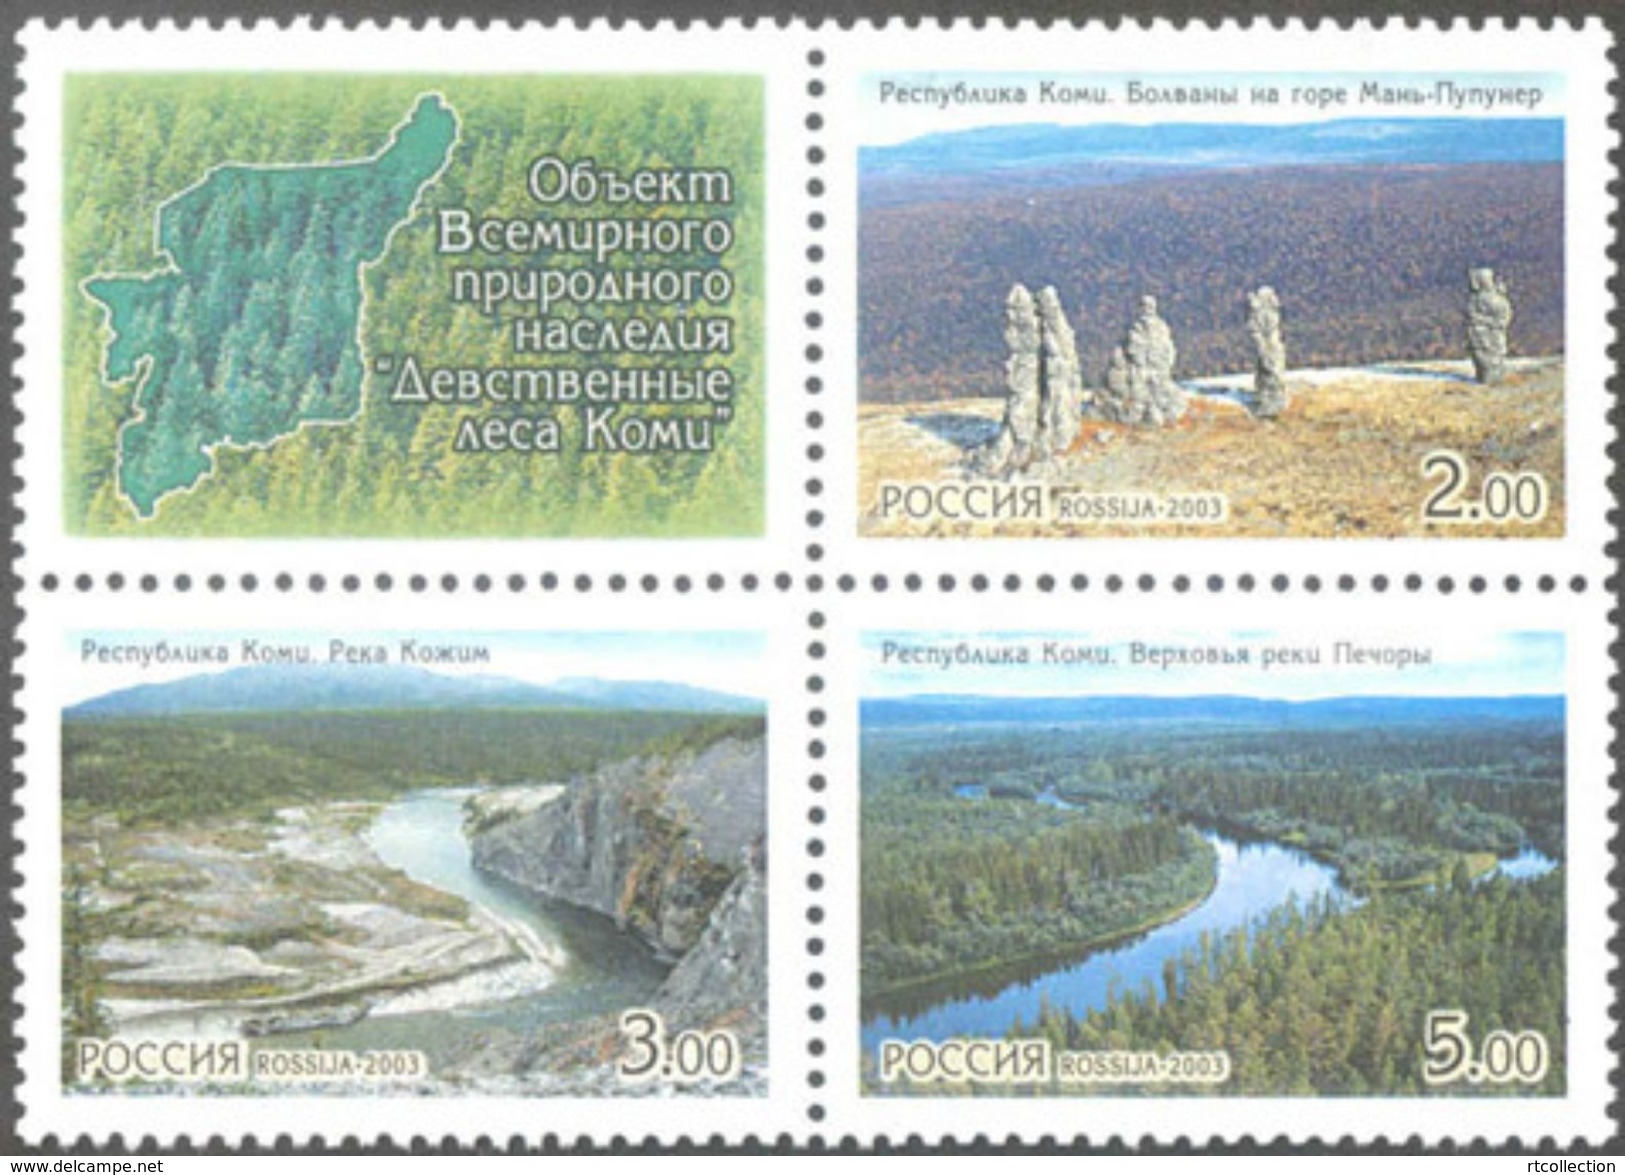 Russia 2003 Block World Natural Heritage Virgin Forest Komi Geography Nature River Mountain Places Stamps Mi 1096-1098Zf - Collezioni